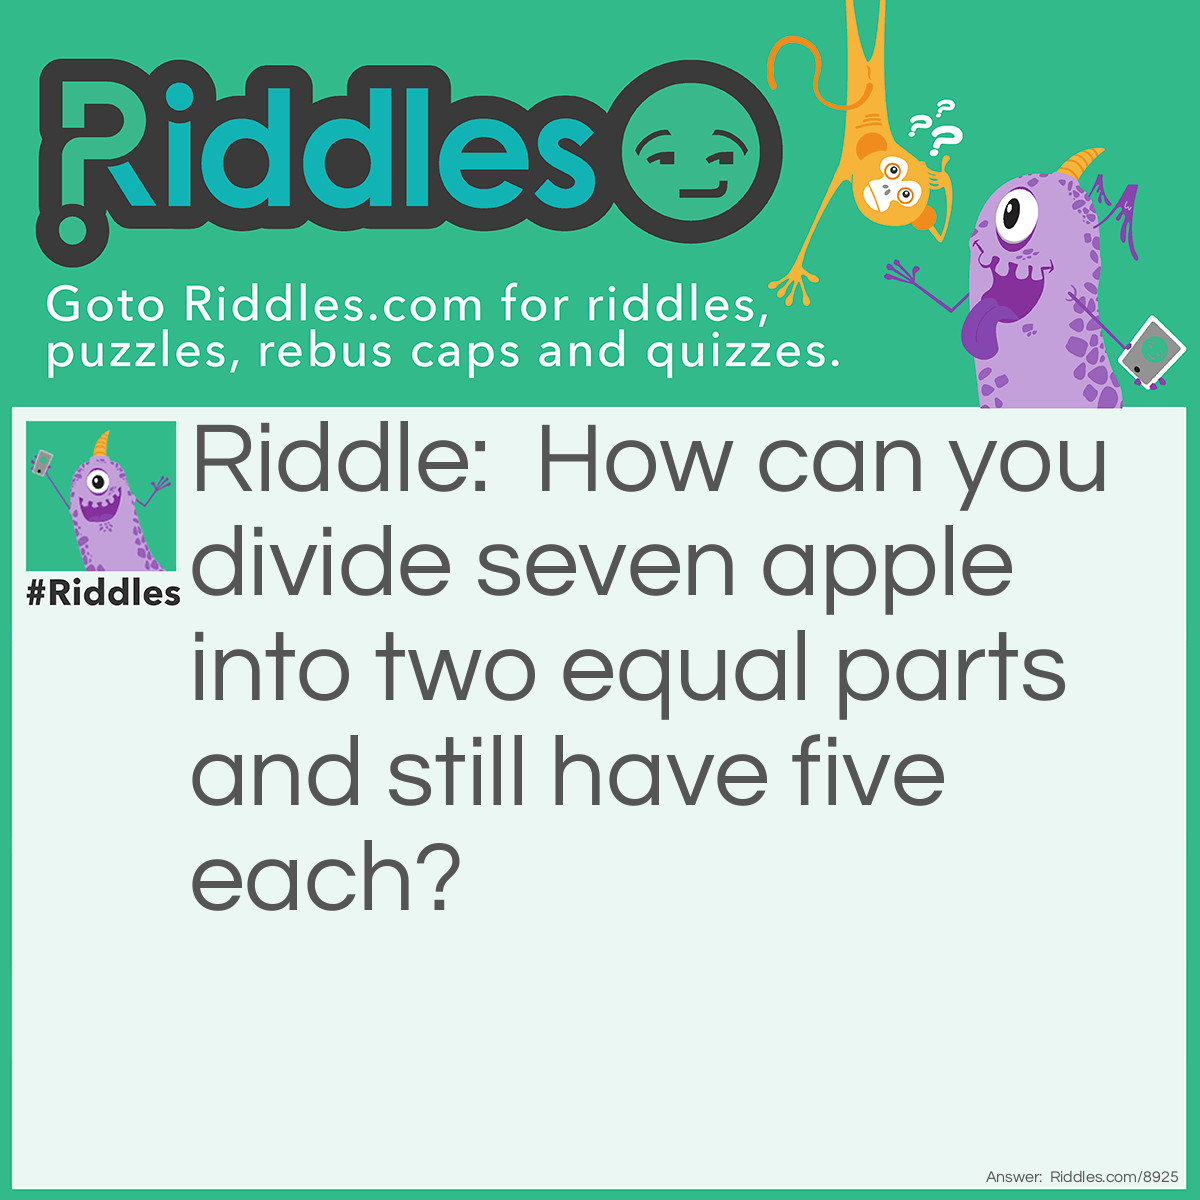 Riddle: How can you divide seven apple into two equal parts and still have five each? Answer: It's to separate the phrase, "seven apple" into two: 'seven' and 'apple', each having five letters! Got it?